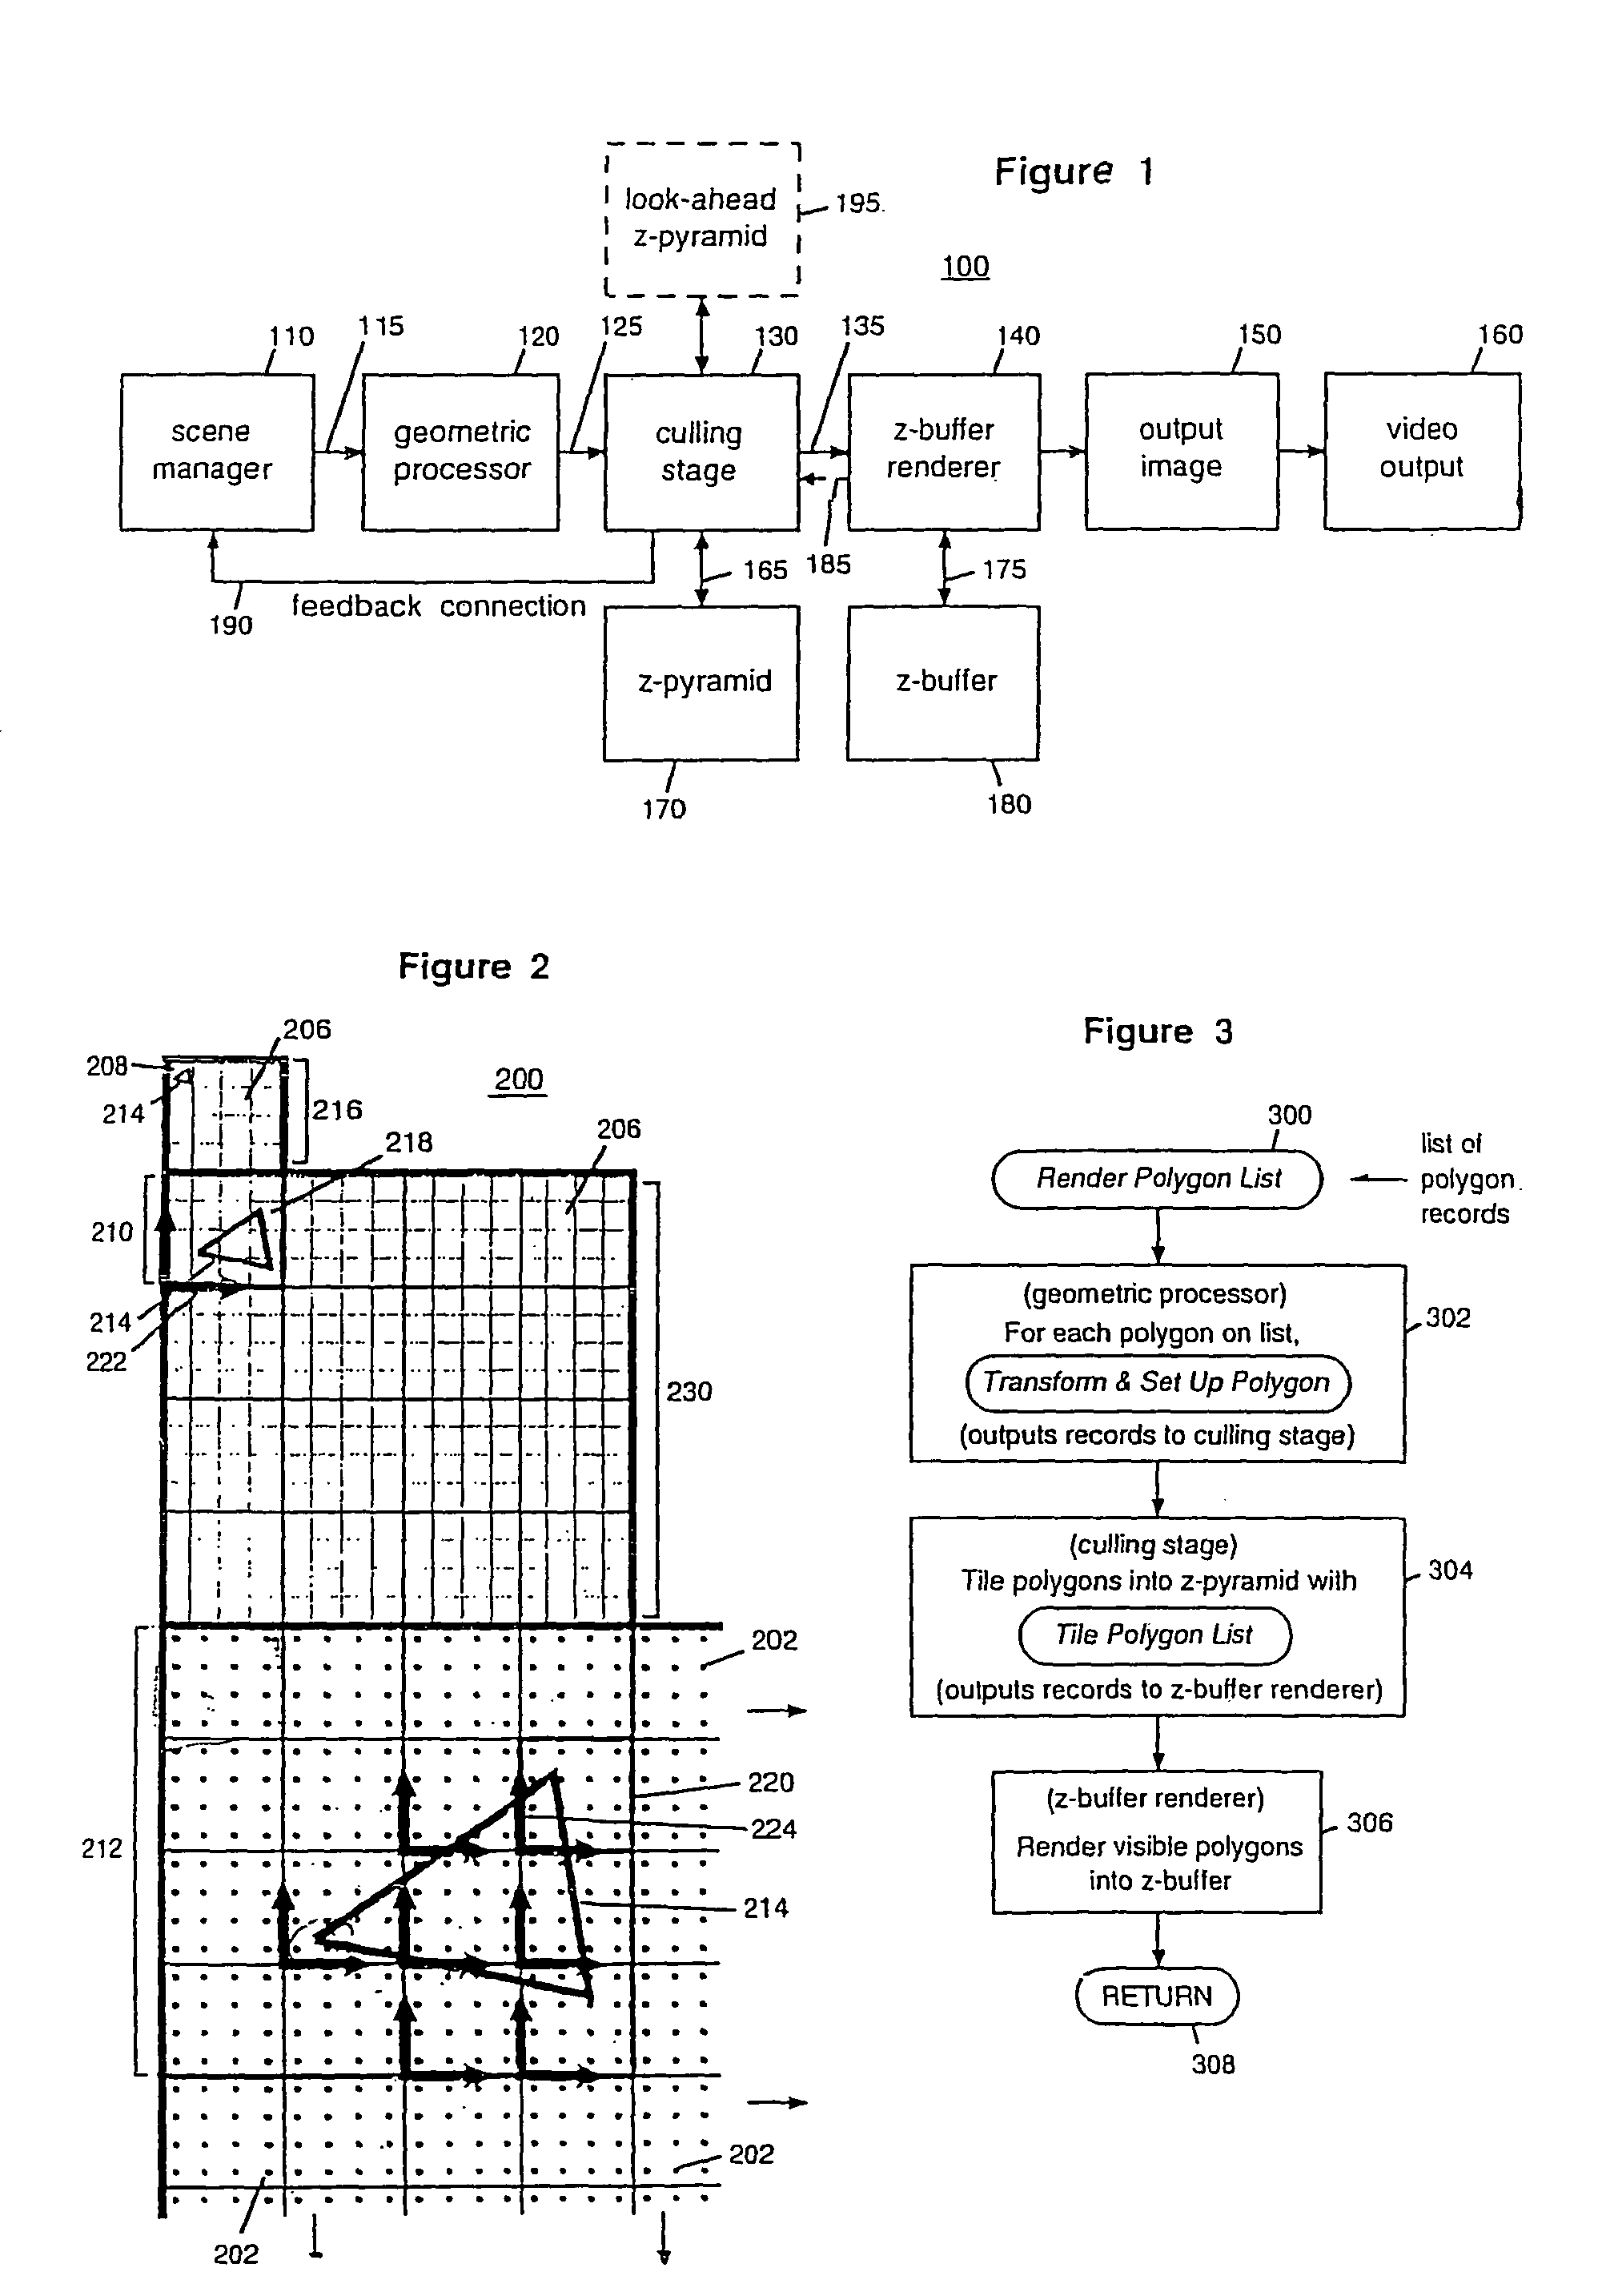 System, method and computer program product for transforming a polynomial equation from a coordinate frame of one tile to a coordinate frame of another tile at a finer level of a hierarchy